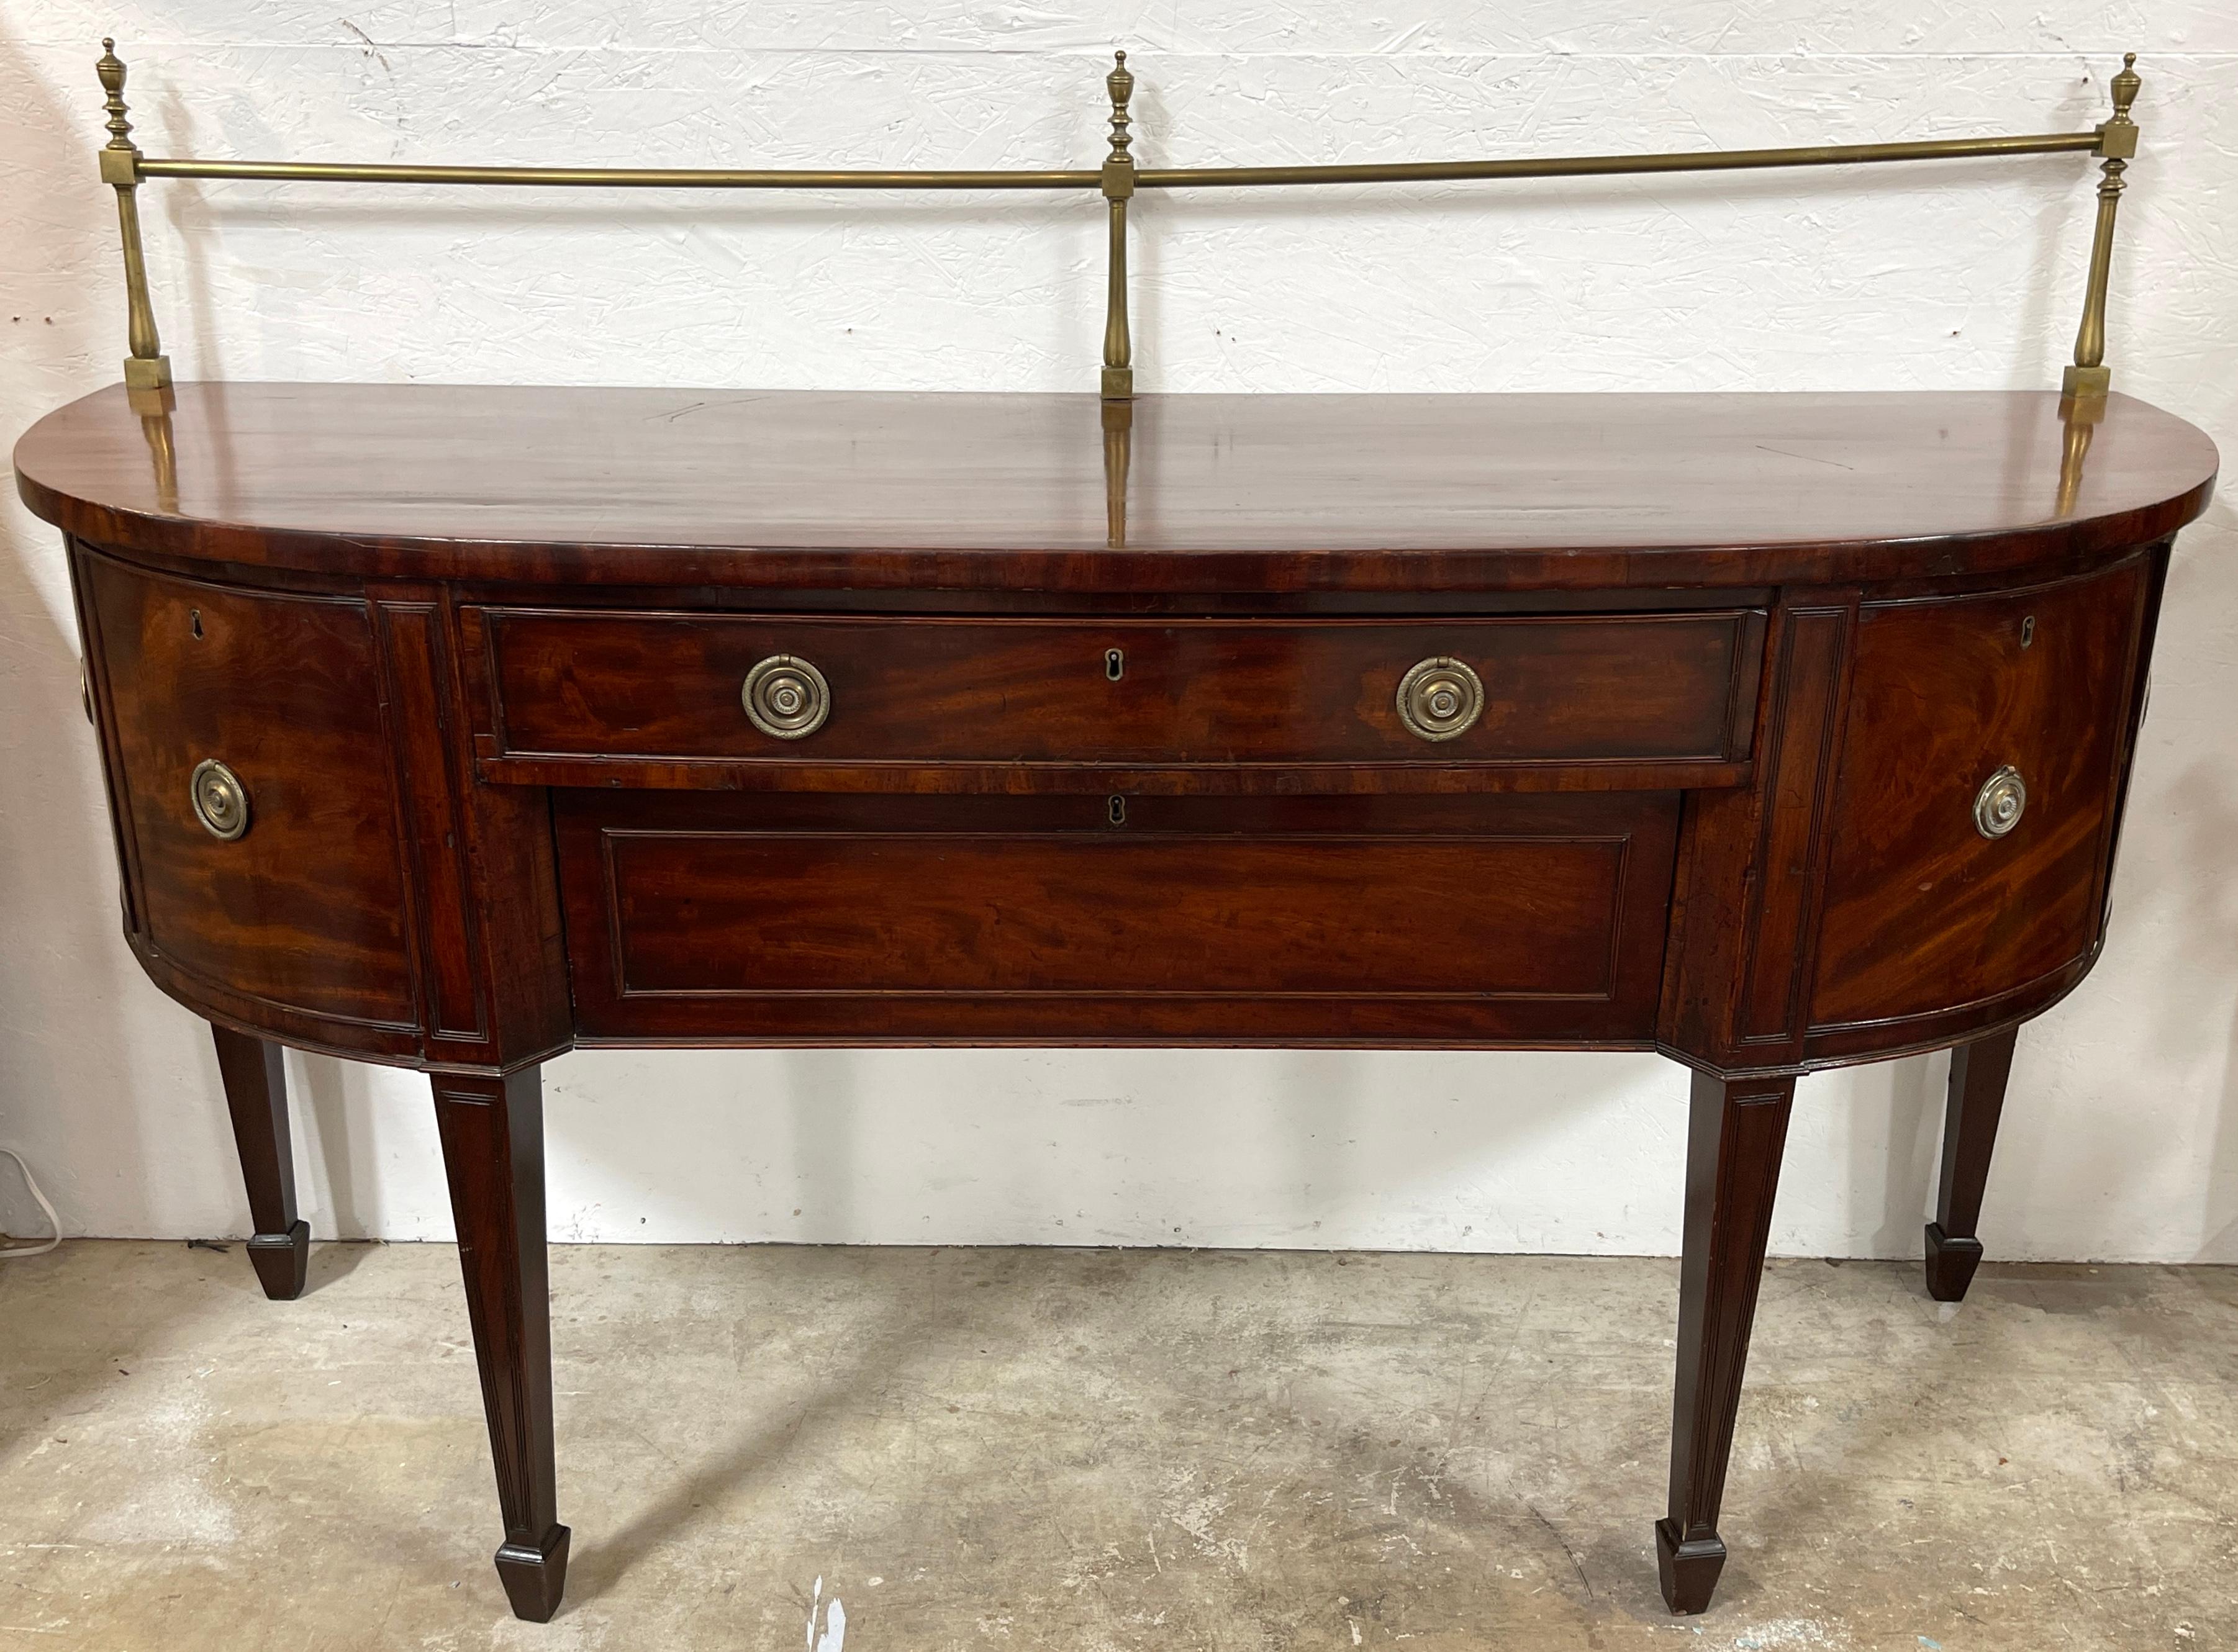 19th Century English George III Mahogany & Brass Gallery Hunt/Sideboard
England, Circa 1820

A exquisite 19th Century English George III Mahogany & Brass Gallery Hunt/Sideboard, a testament to restrained elegance and impeccable craftsmanship from